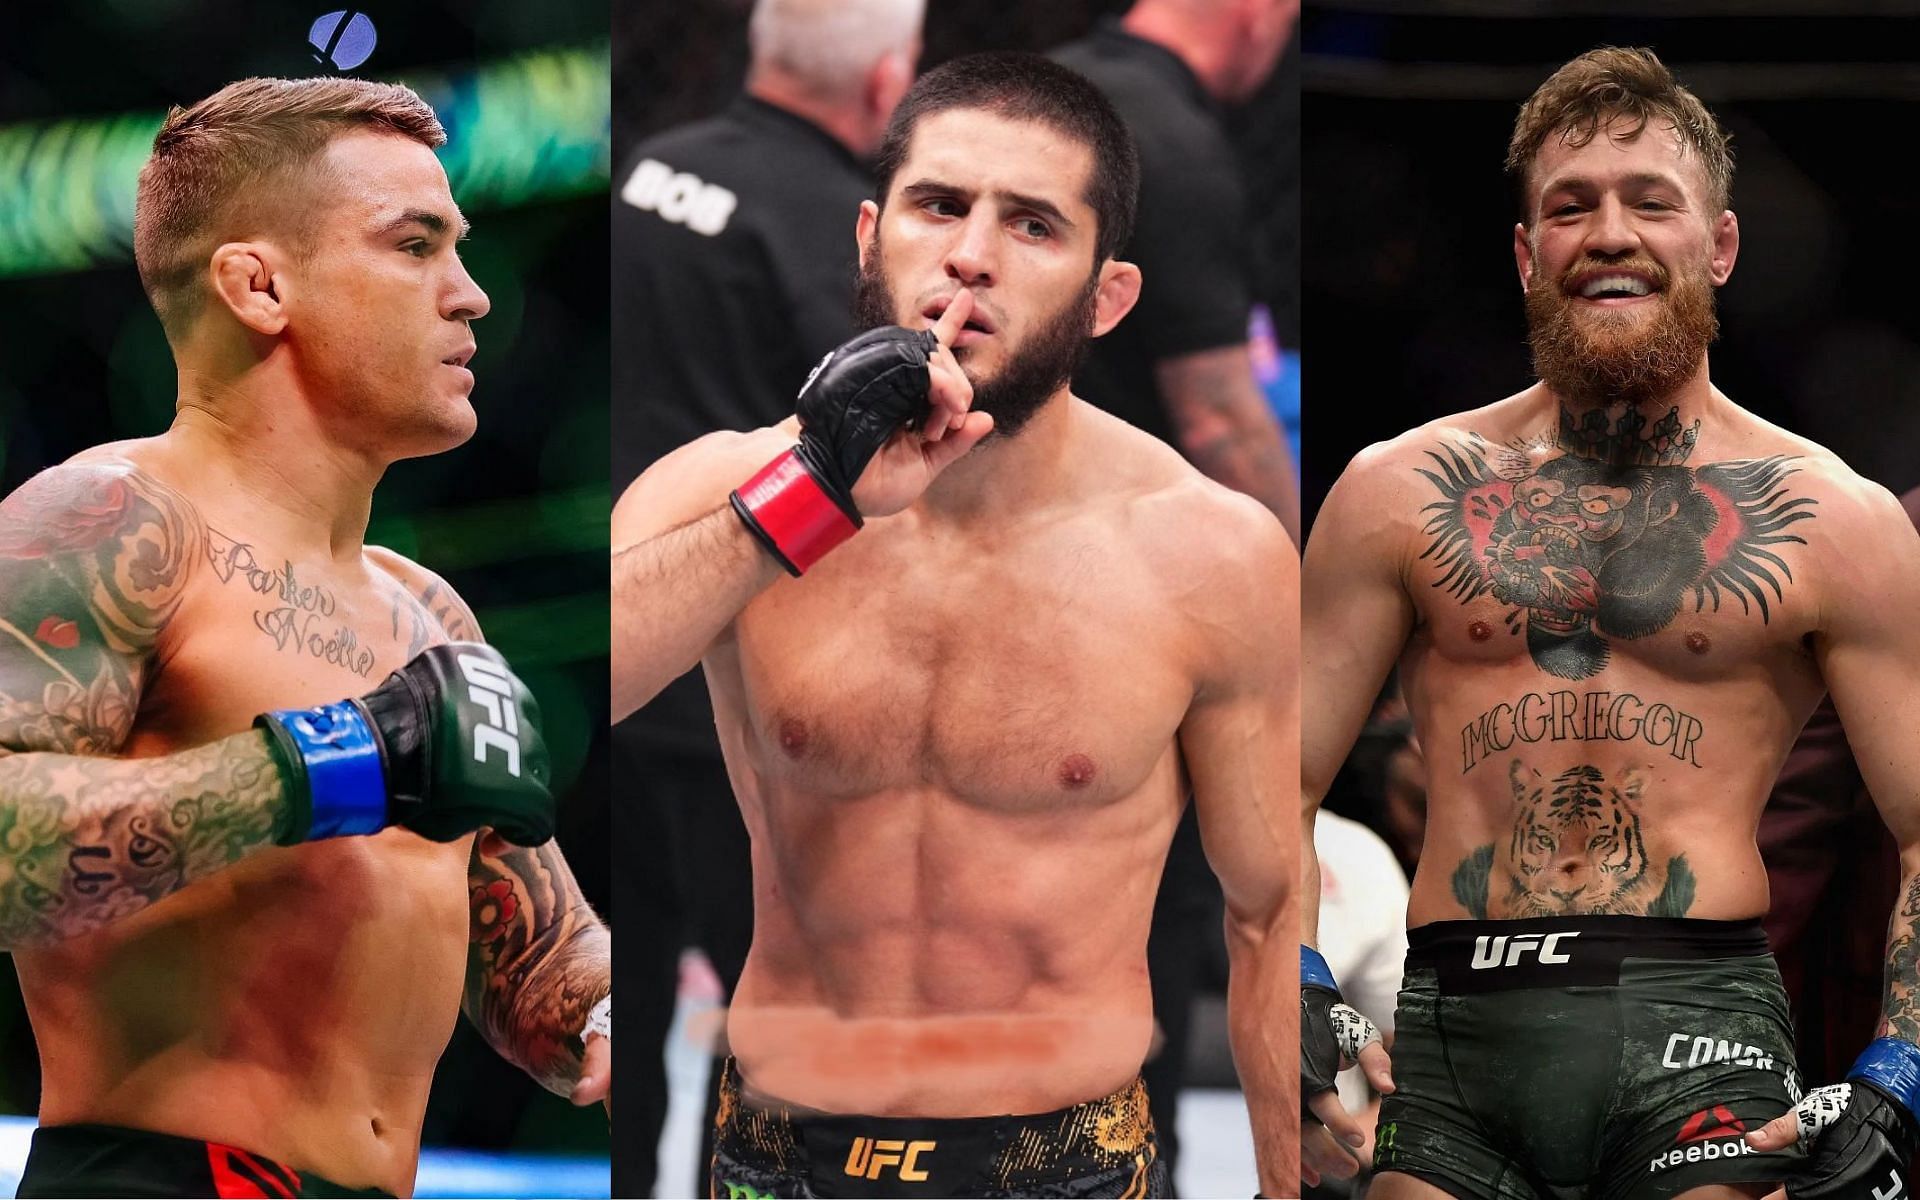 Islam Makhachev (middle) should push for fights with Dustin Poirier (left) and Conor McGregor (right), says former teammate [Images Courtesy: @GettyImages, @islam_makhachev on Instagram]